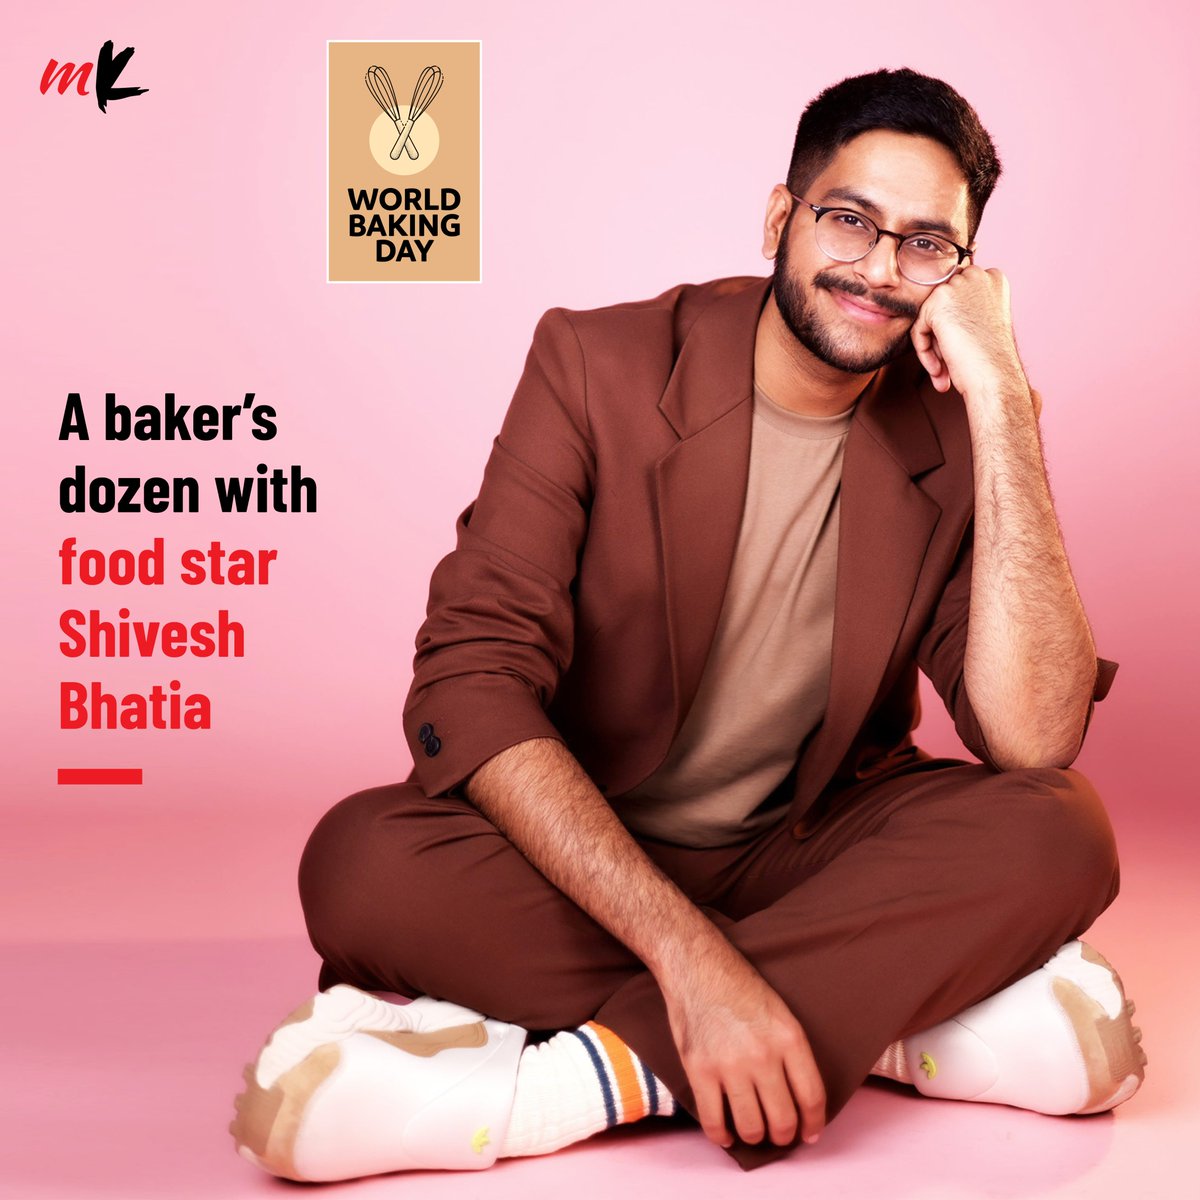 Did you know, star baker @bakewithshivesh loves sandesh? On World Baking Day, My Kolkata caught up with the baker and food content creator to have a fun chat about baking, content creation and more. Read it here: telegraphindia.com/my-kolkata/foo… #ContentCreator #Instagrammr #Baker